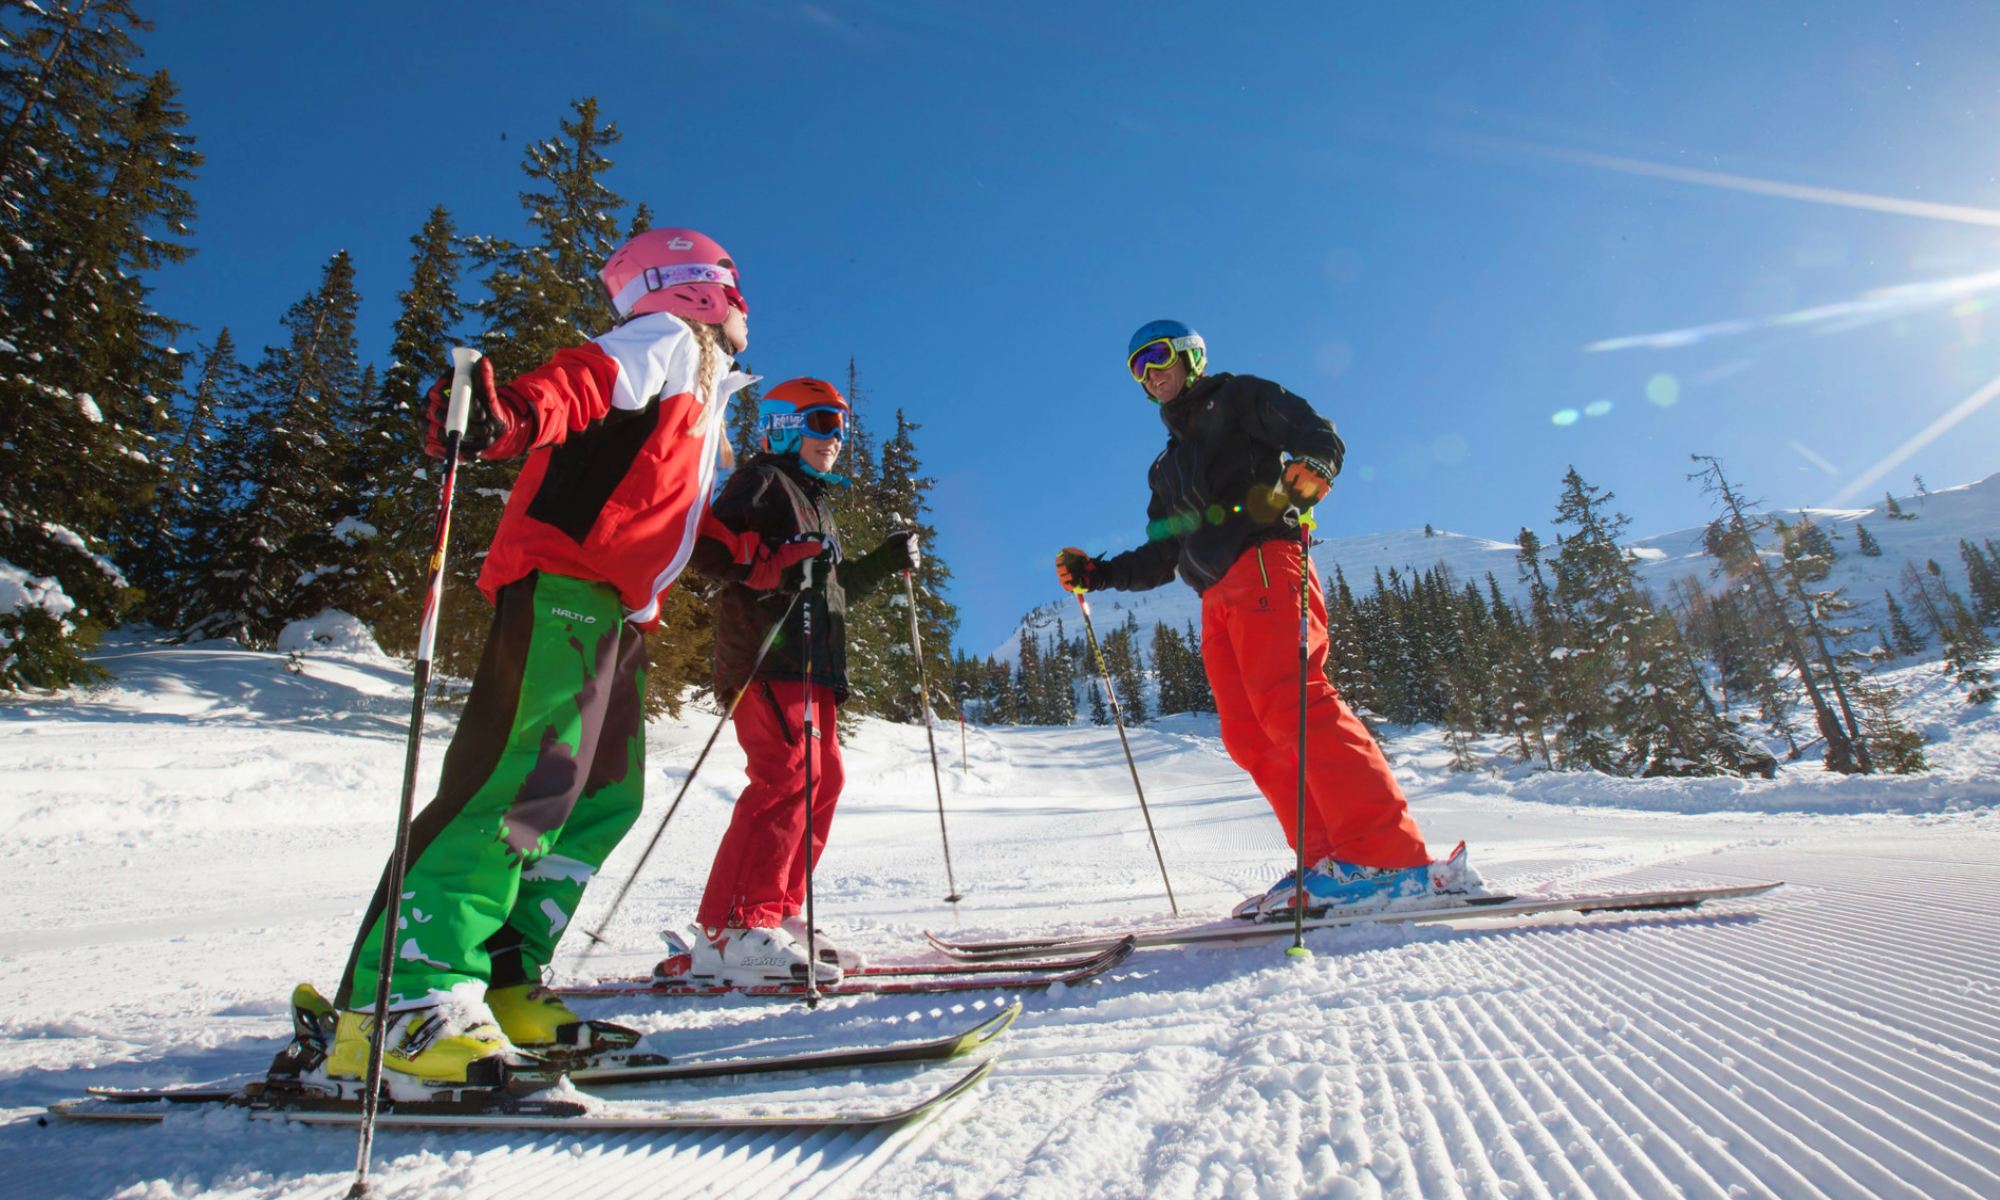 An instructor plus two skiers on the slopes.